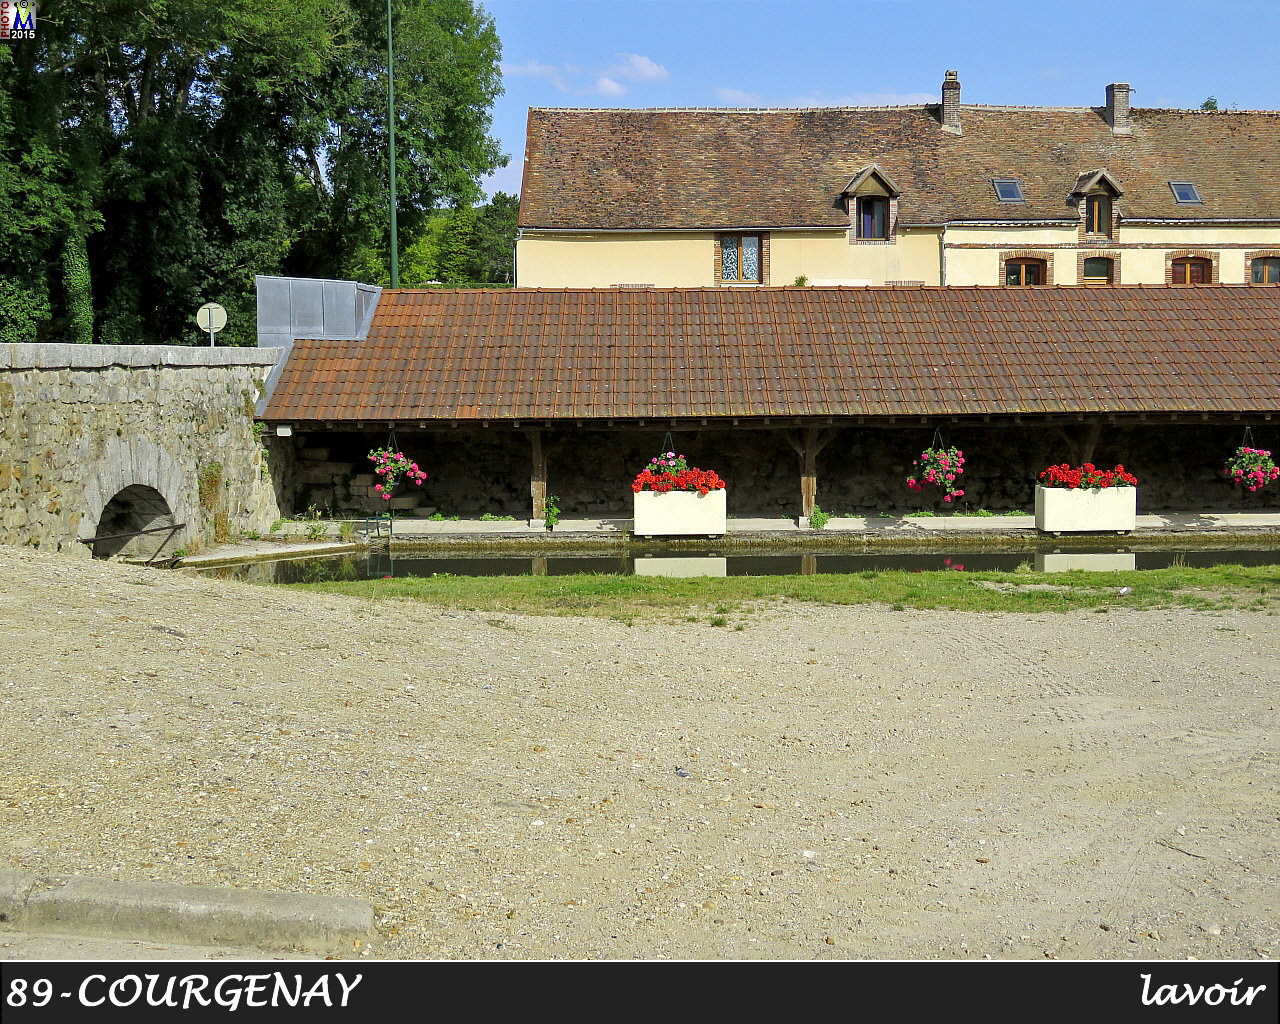 89COURGENAY_lavoir_100.jpg